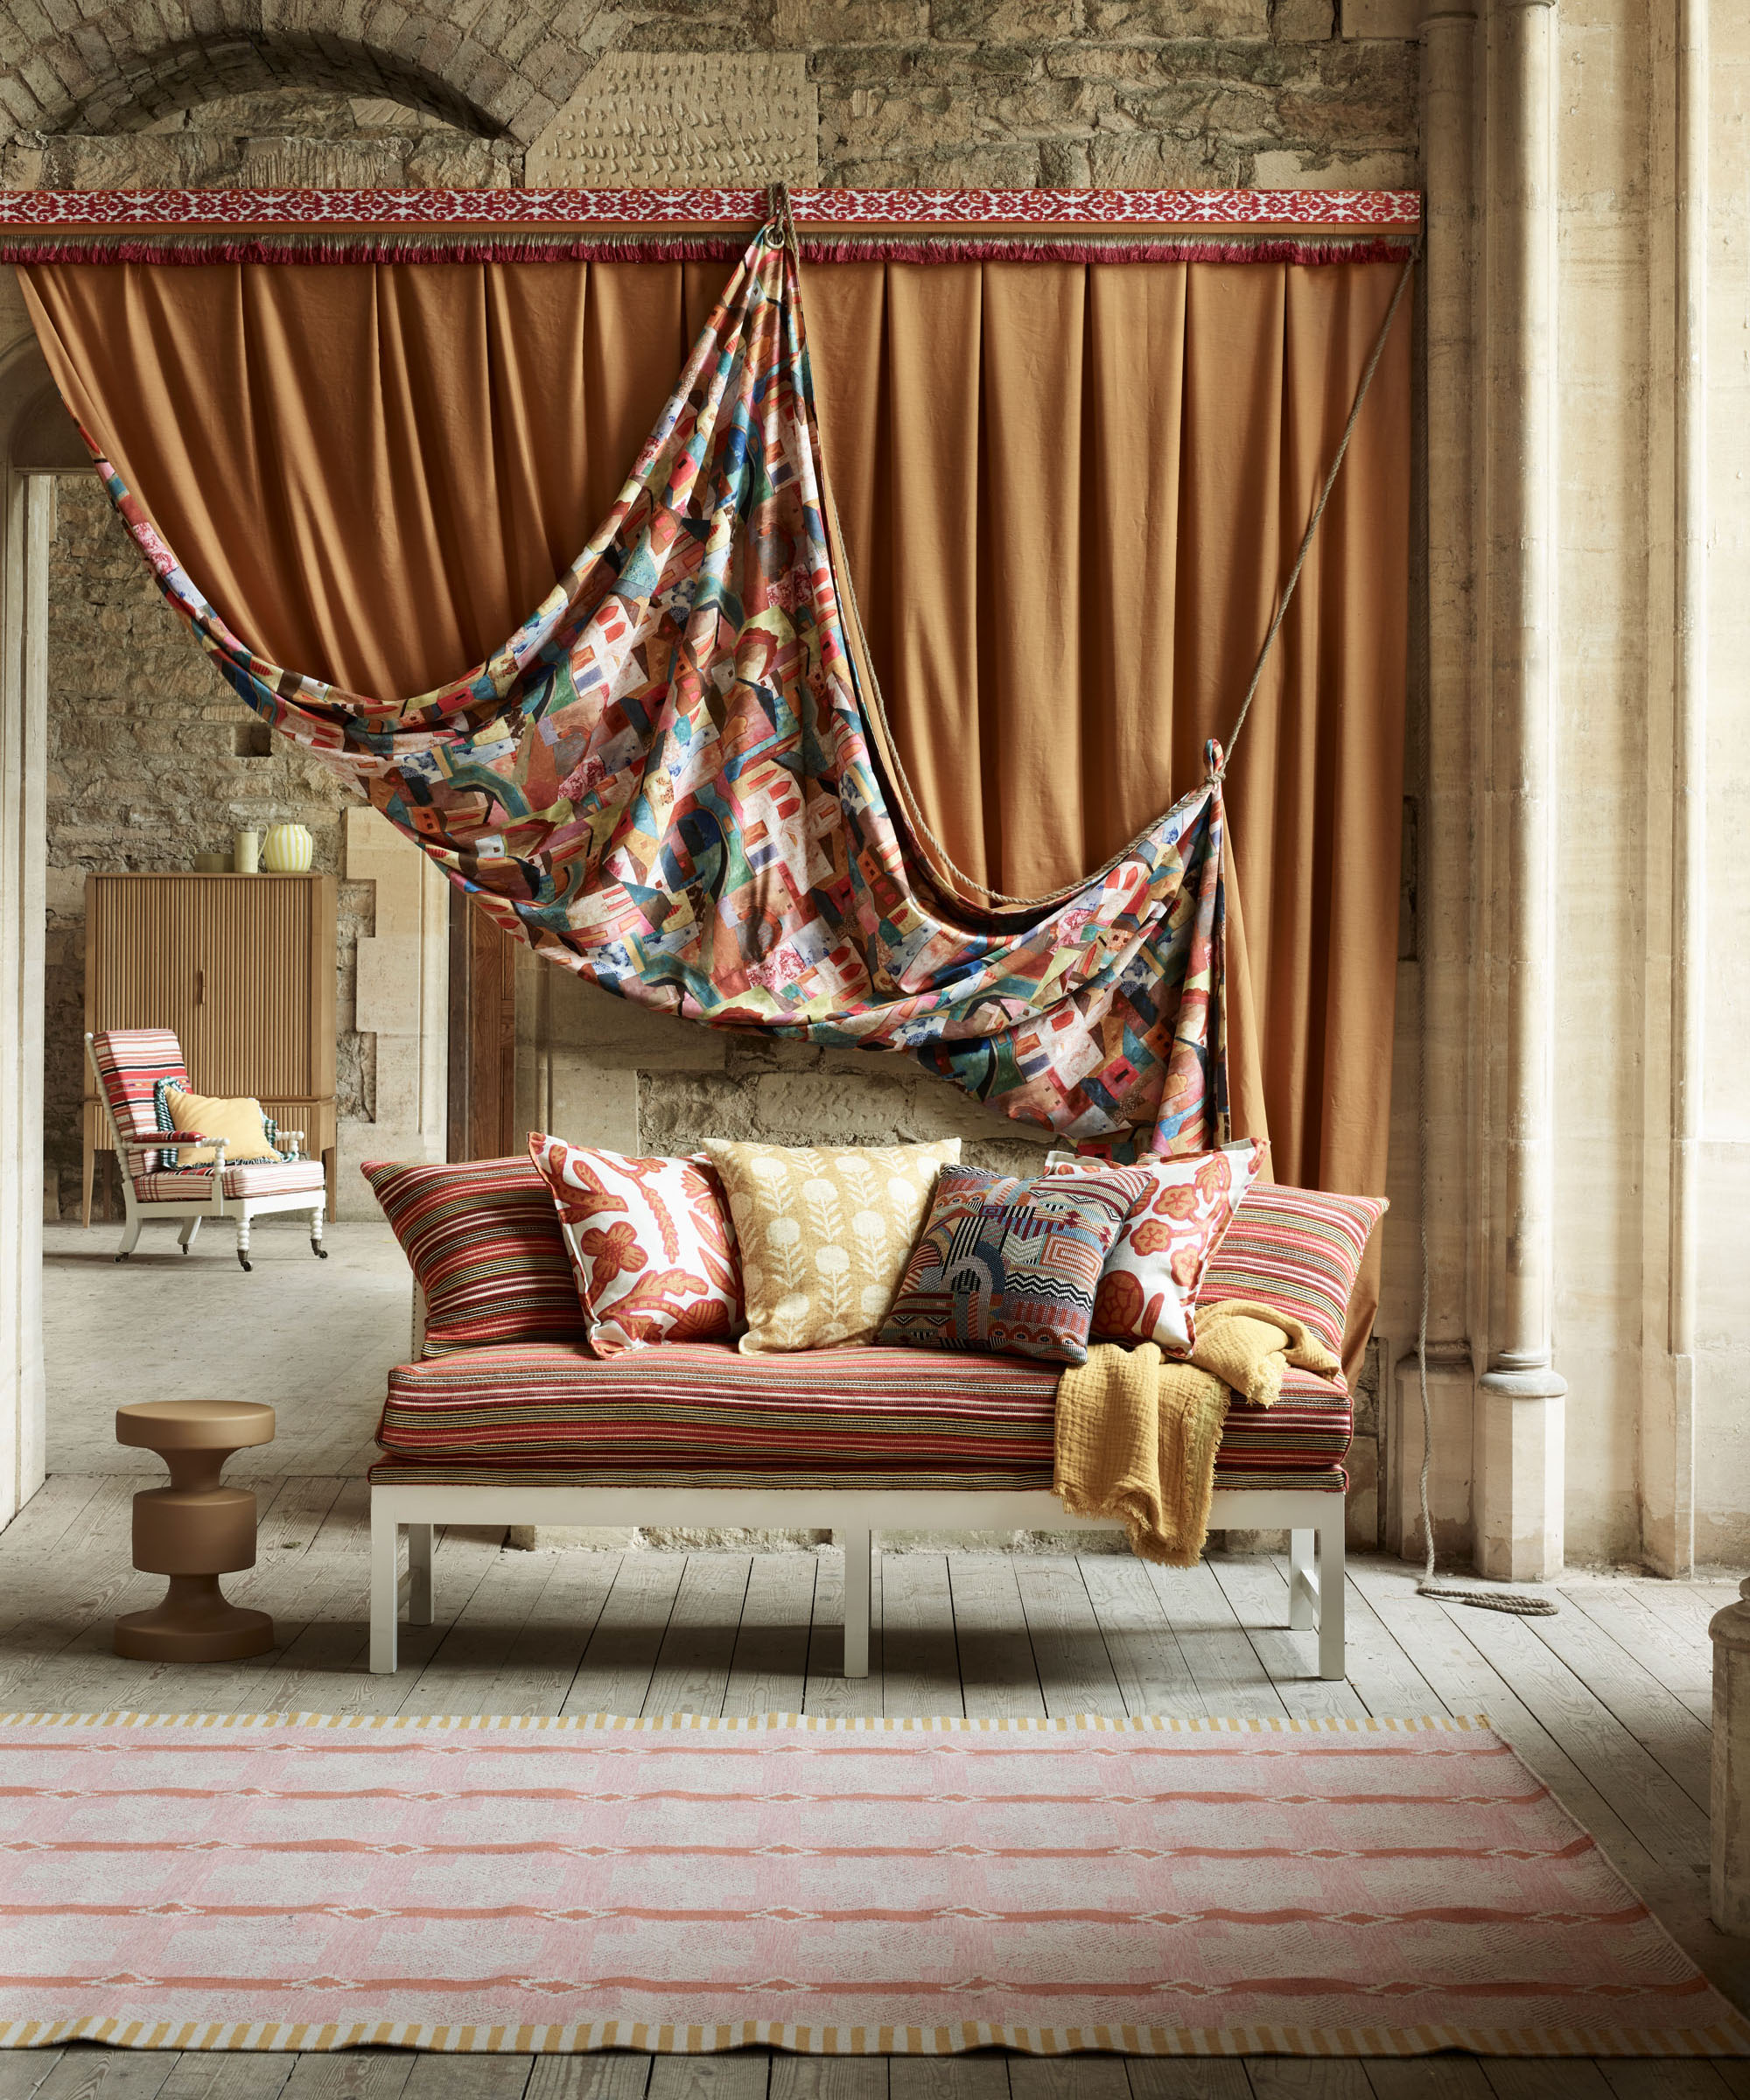 living room with warm tones and textiles inspired by South American influences